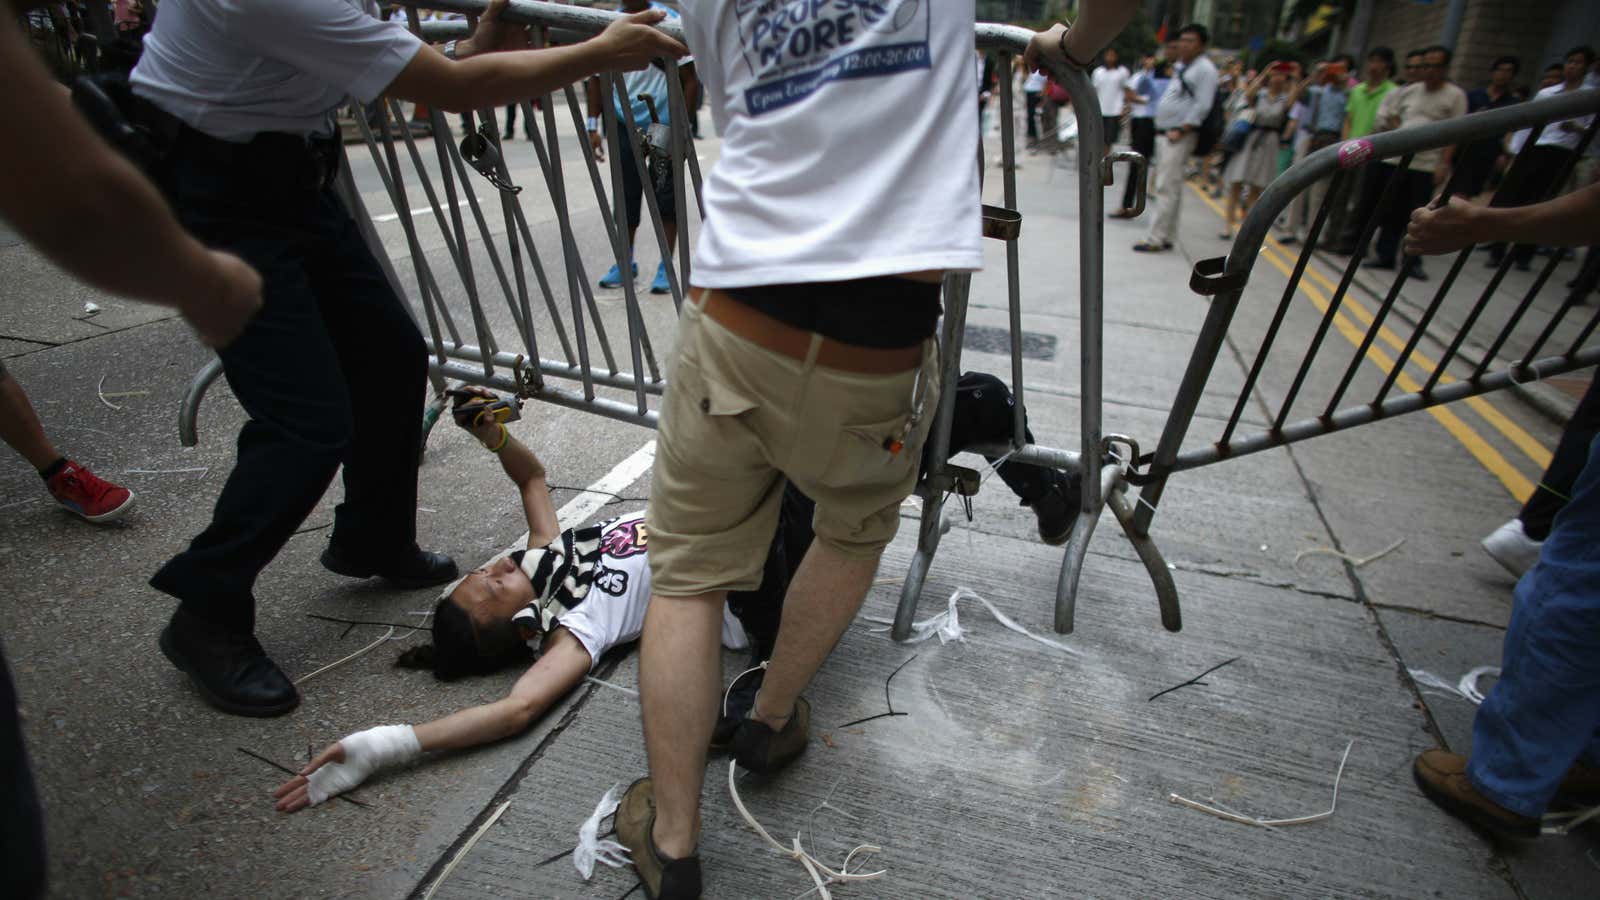 Anti-Occupy protesters drag a metal fence over a pro-democracy protester in central Hong Kong on Monday.